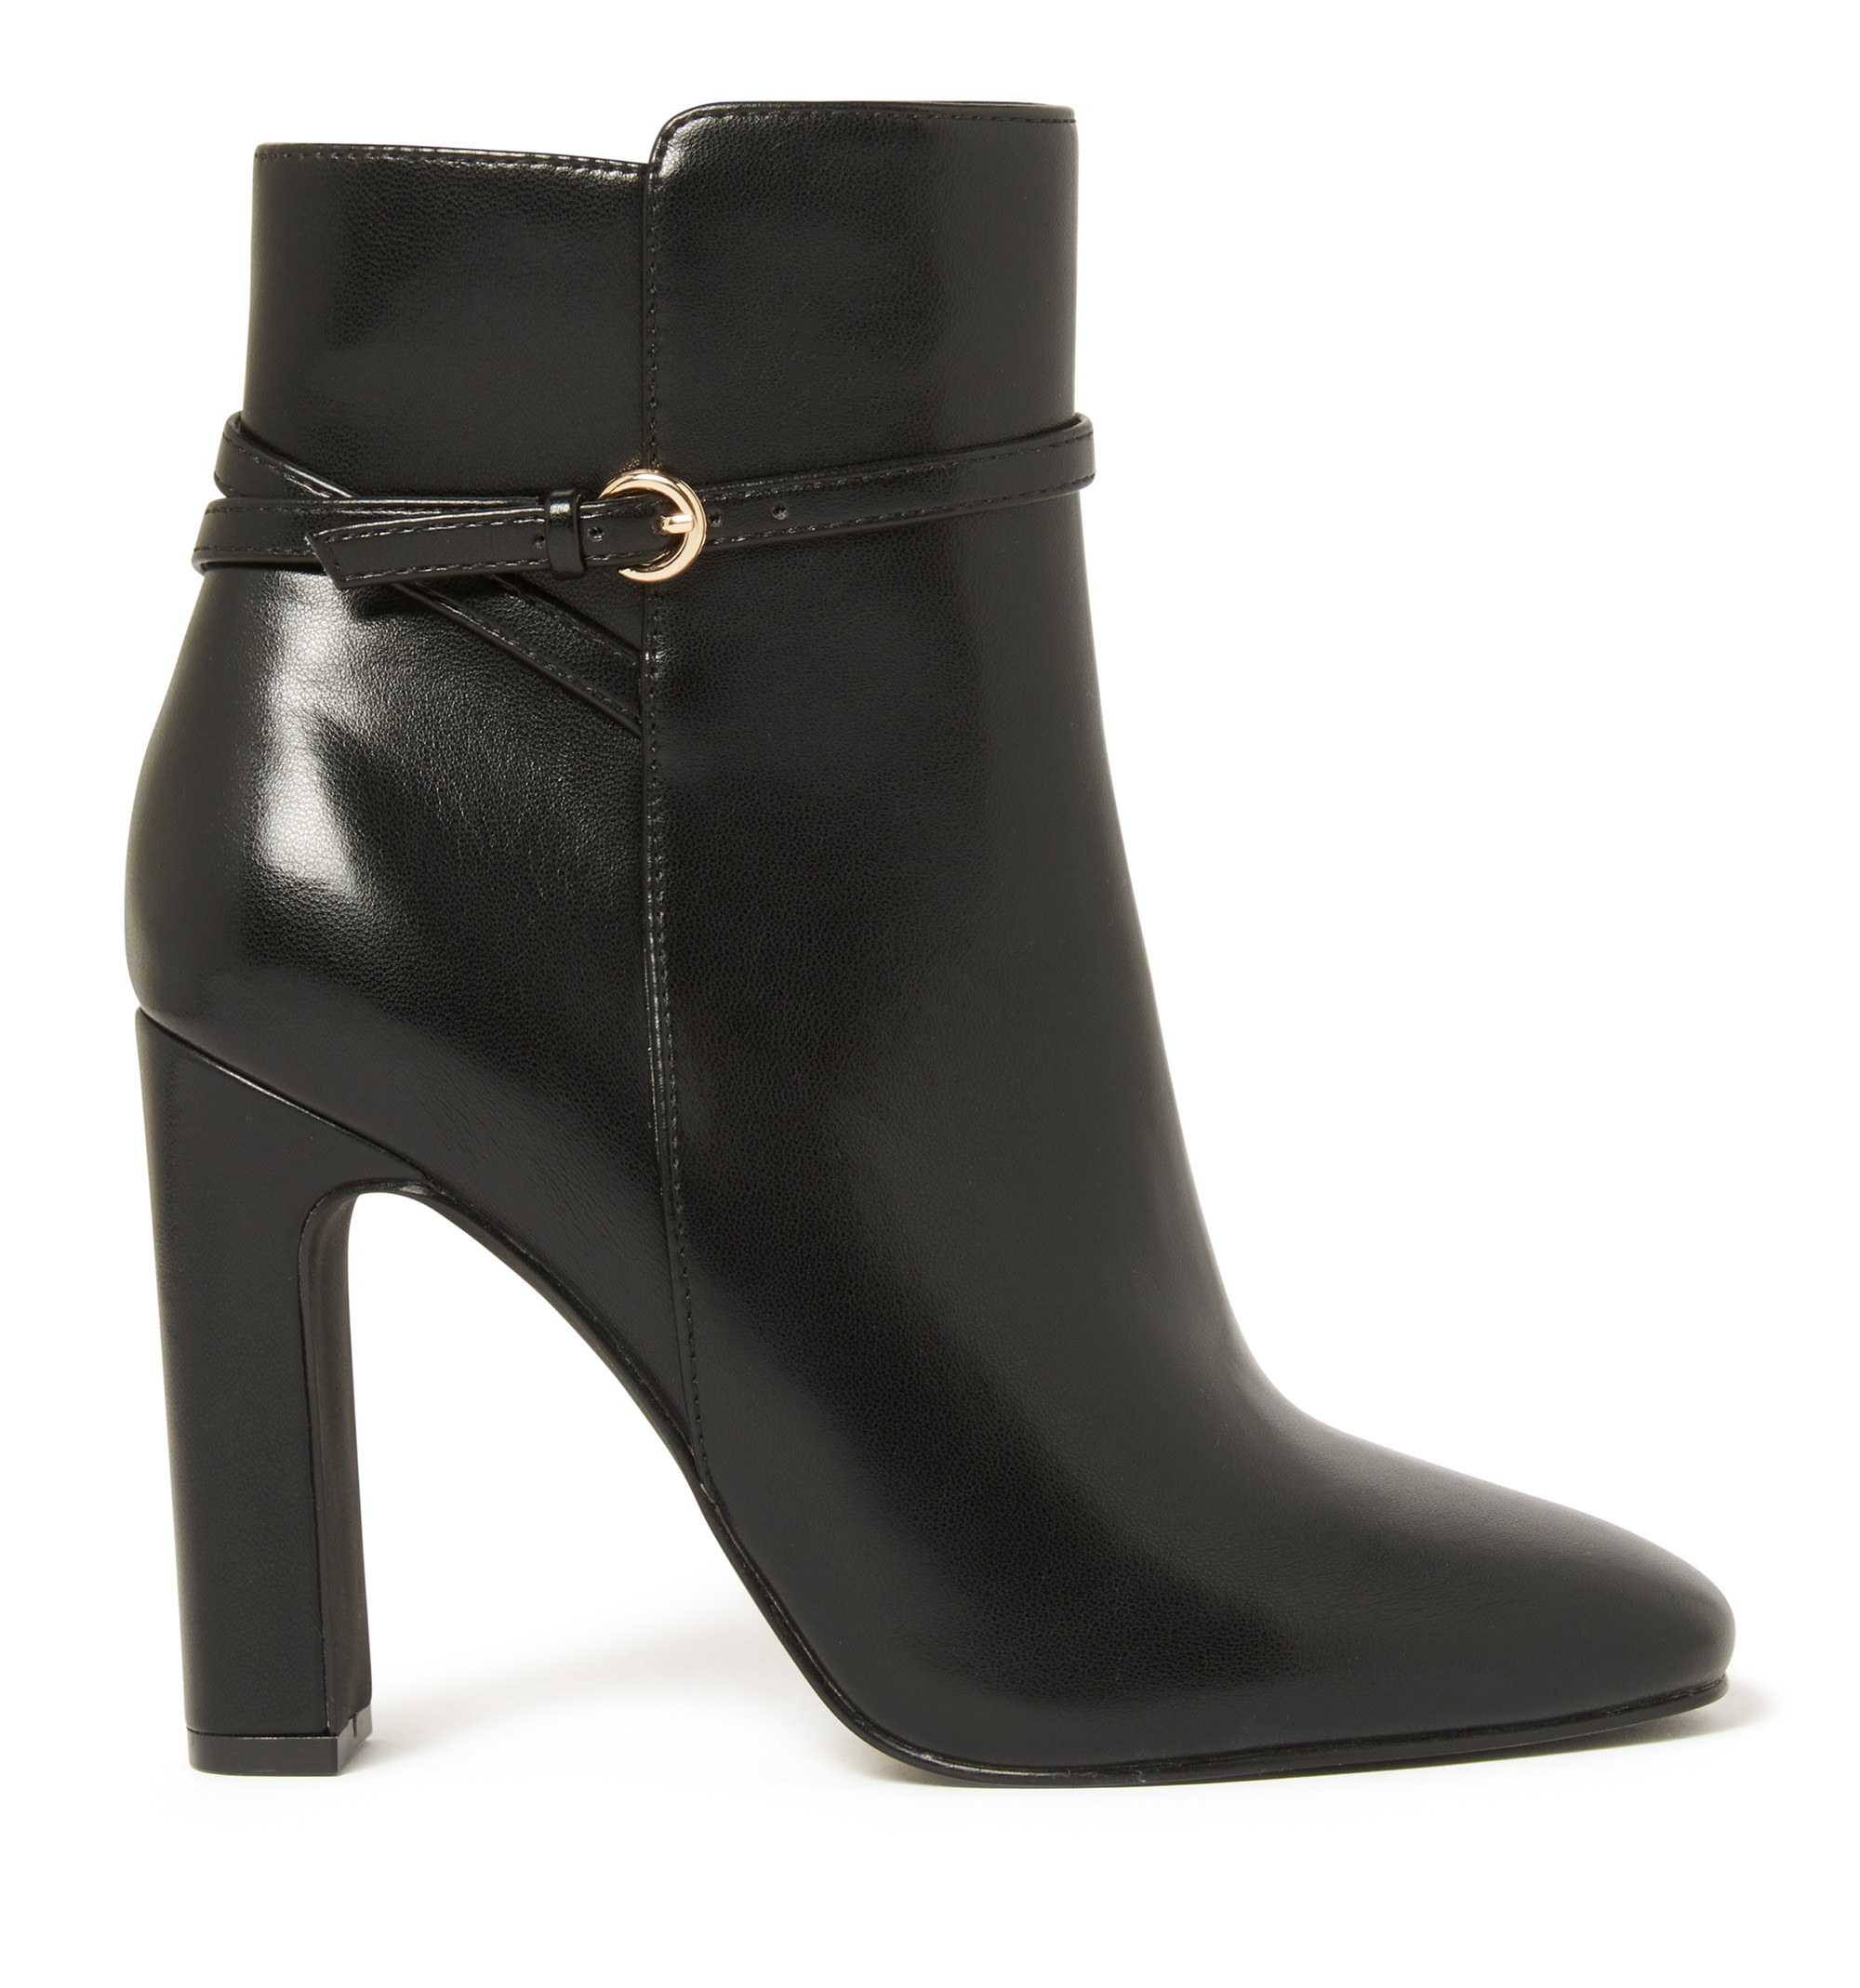 23 Pairs Of Heeled Boots That Won't Kill Your Feet